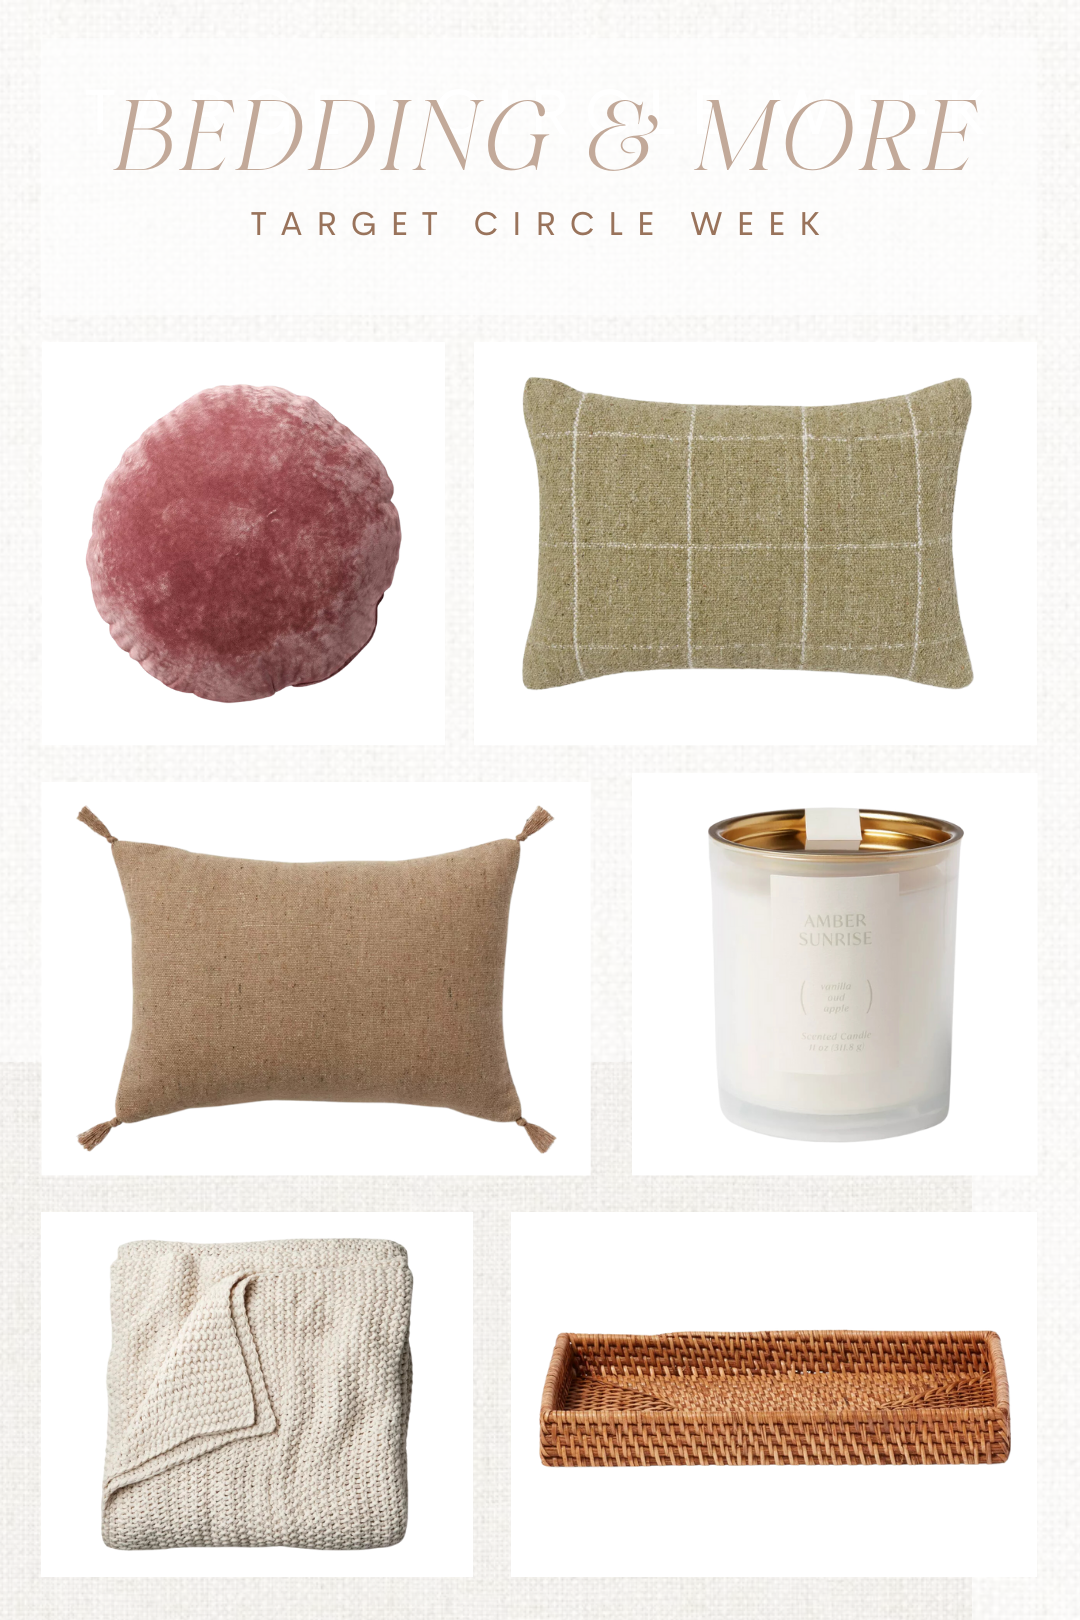 Target Circle Week deals. Bedding, pillows, throw blankets and more